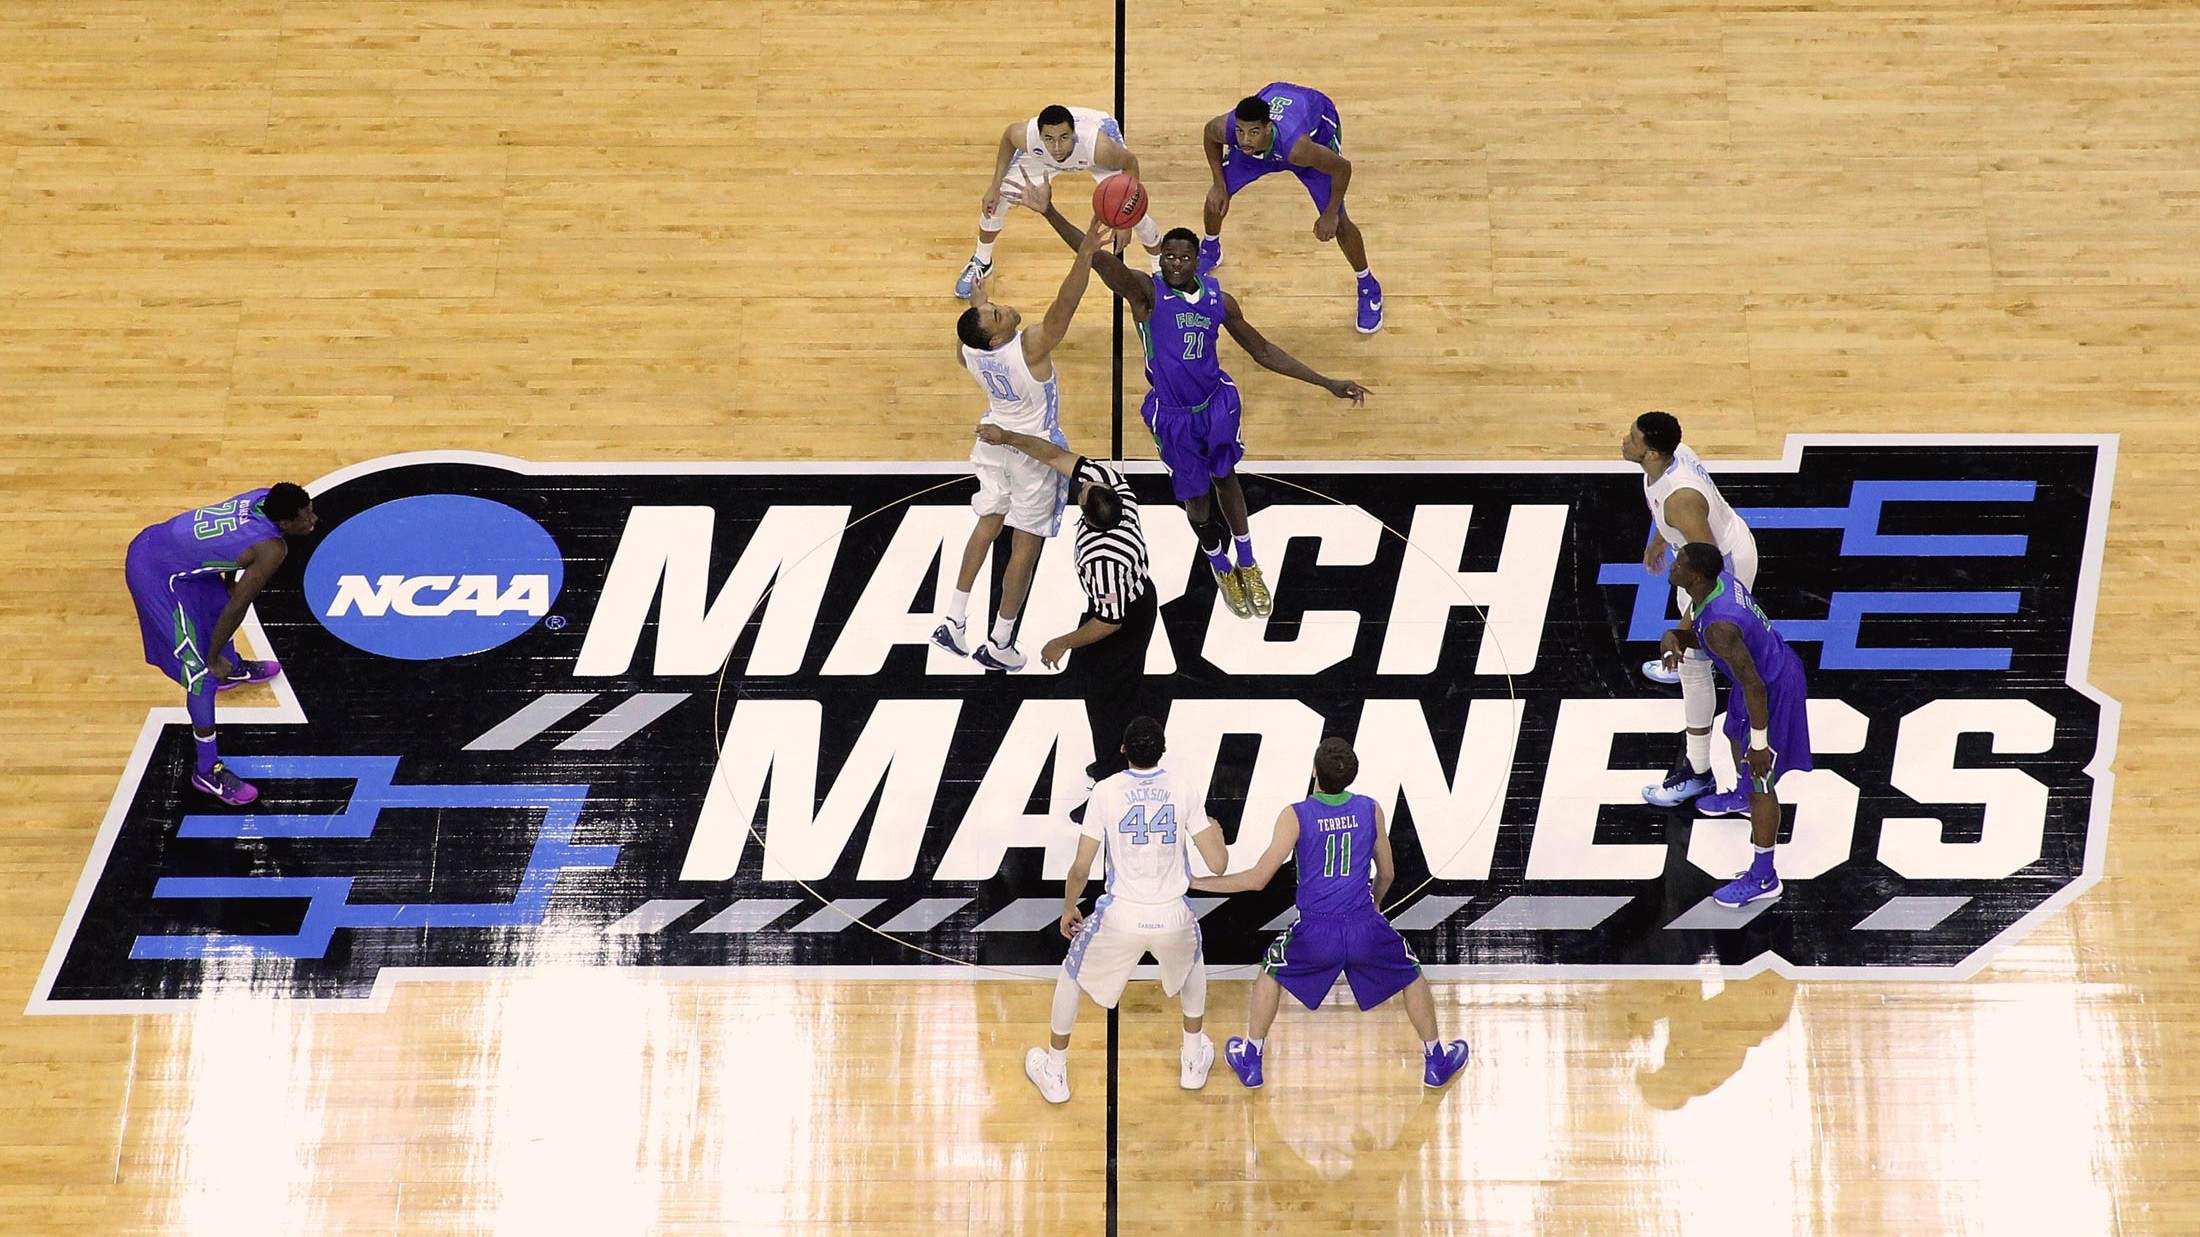 simplebet-launches-college-basketball-micro-betting-products ahead-of-march-madness